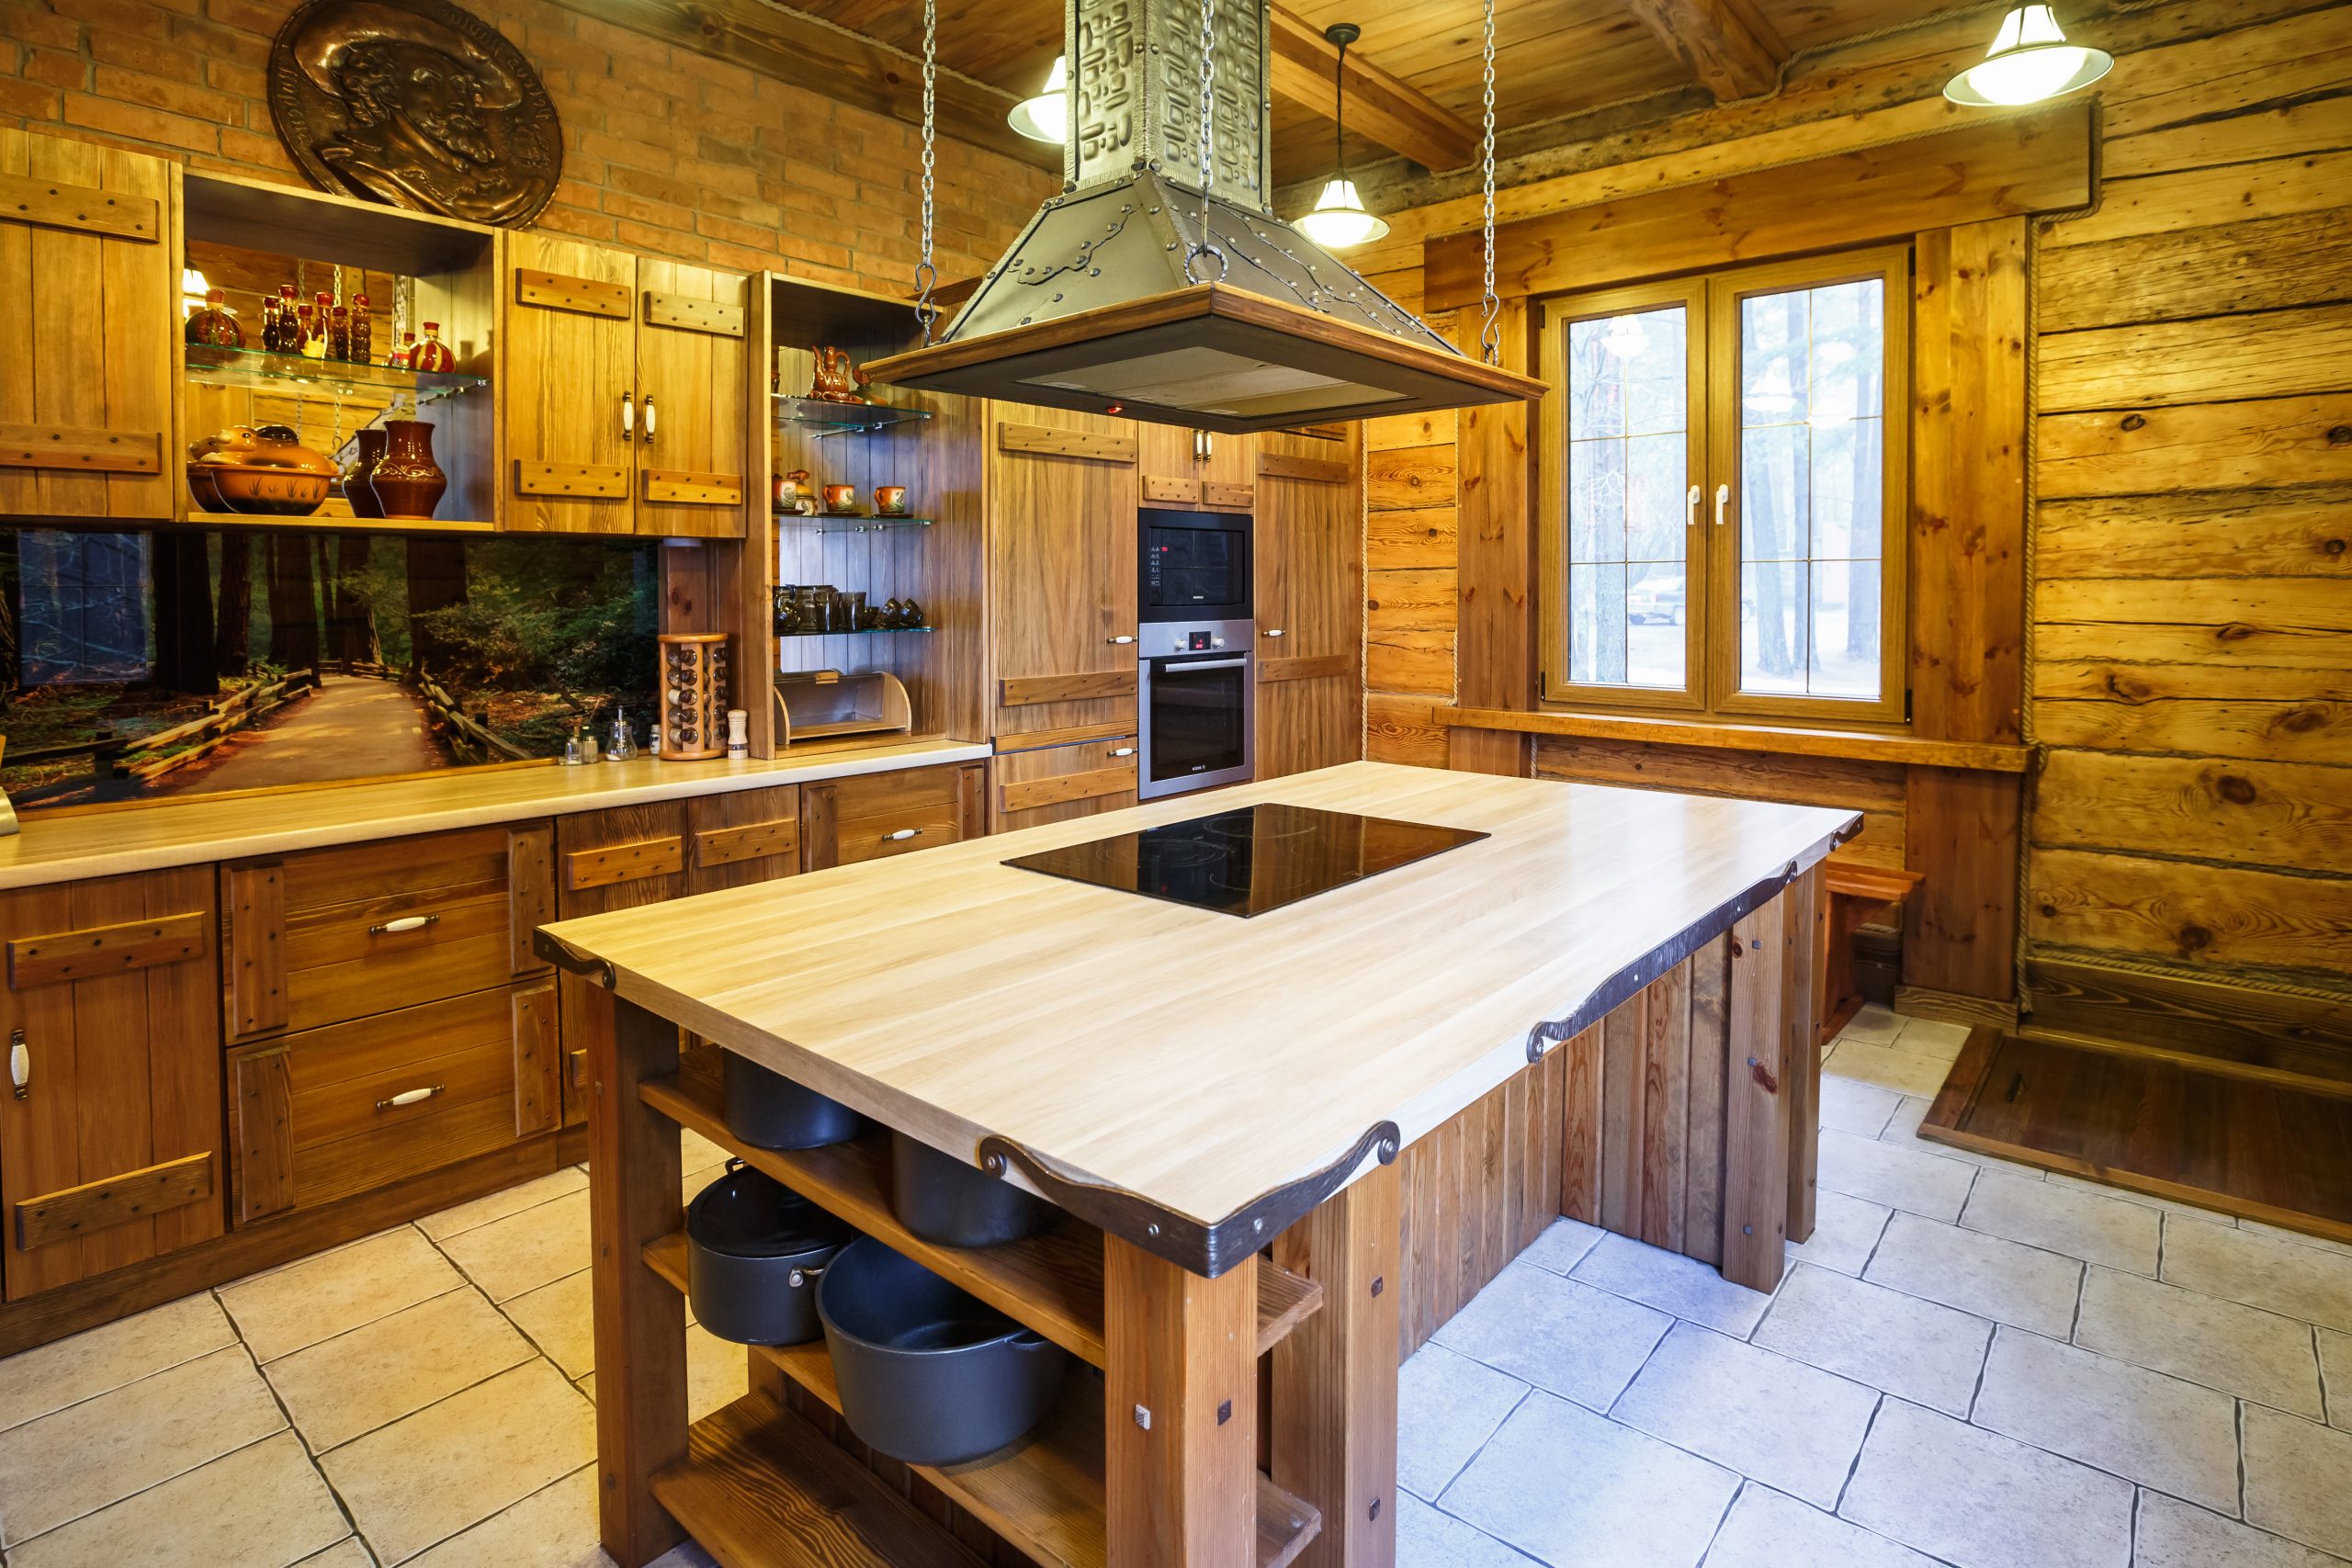 The Charm of Rustic Kitchen Island in Today's Homes